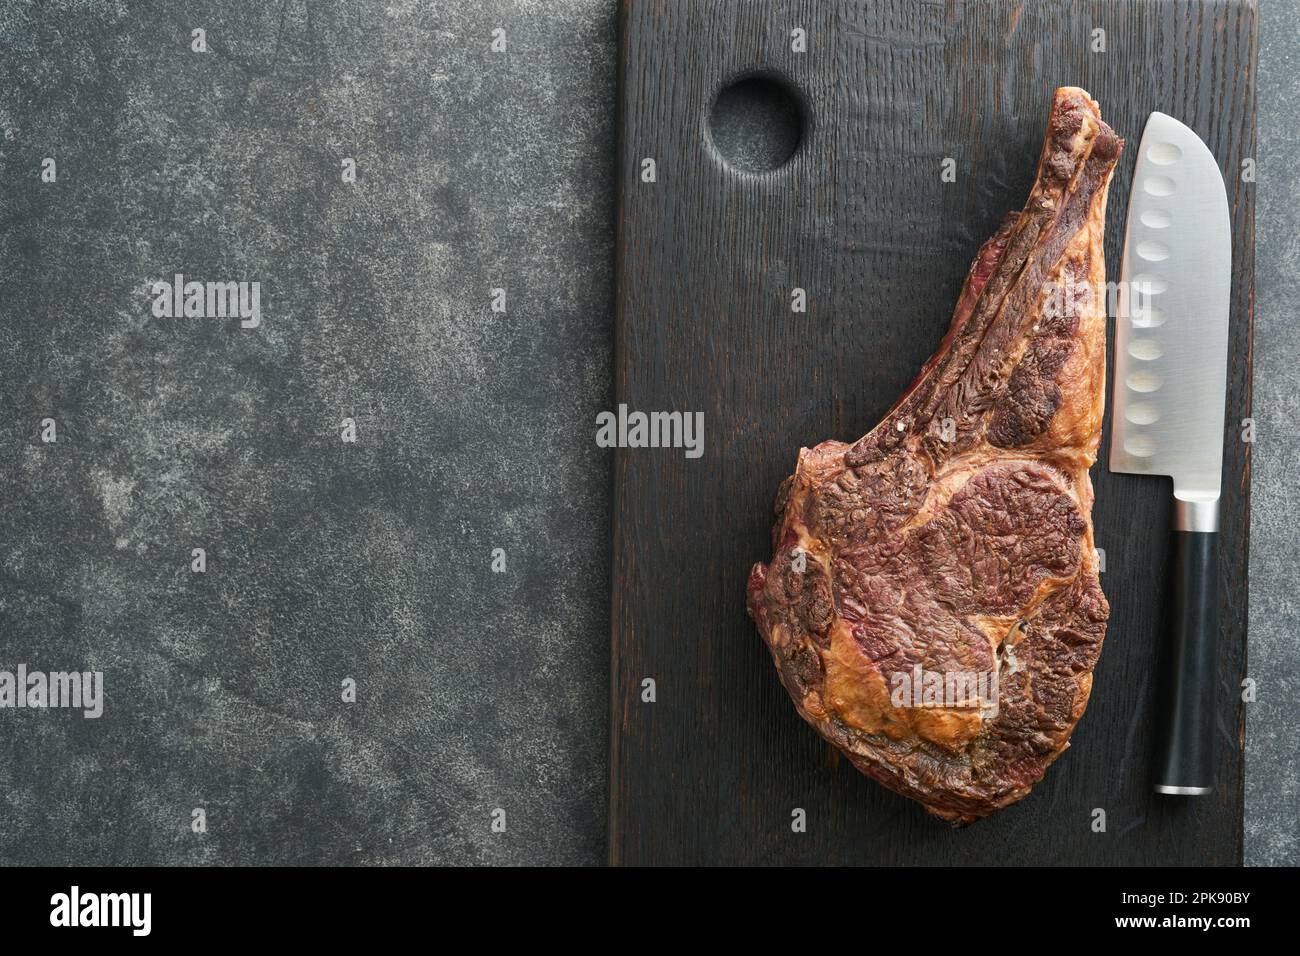 Tomahawk steak. Sliced grilled tomahawk beef steak with baked cherry tomatoes, herbs and salt on old wooden background. Preparing to grill.  Top view Stock Photo